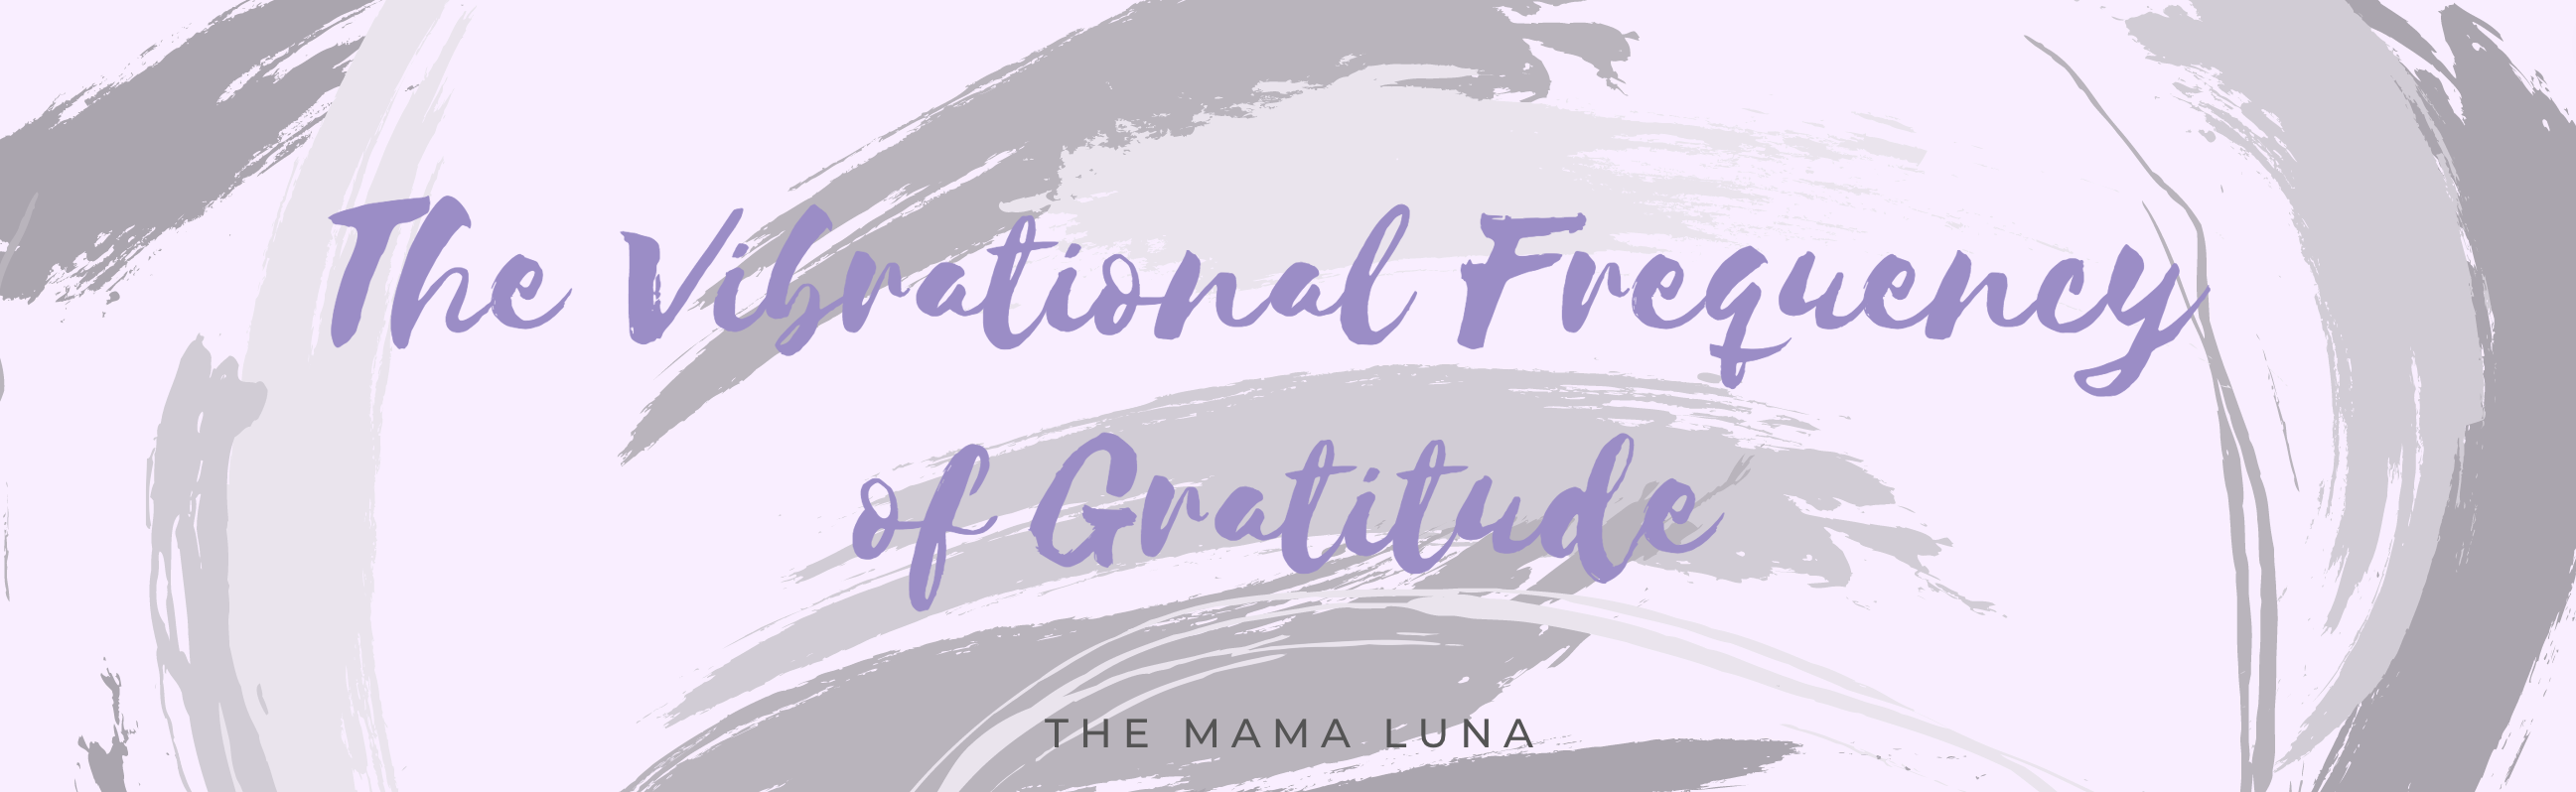 The Vibrational Frequency of Gratitude